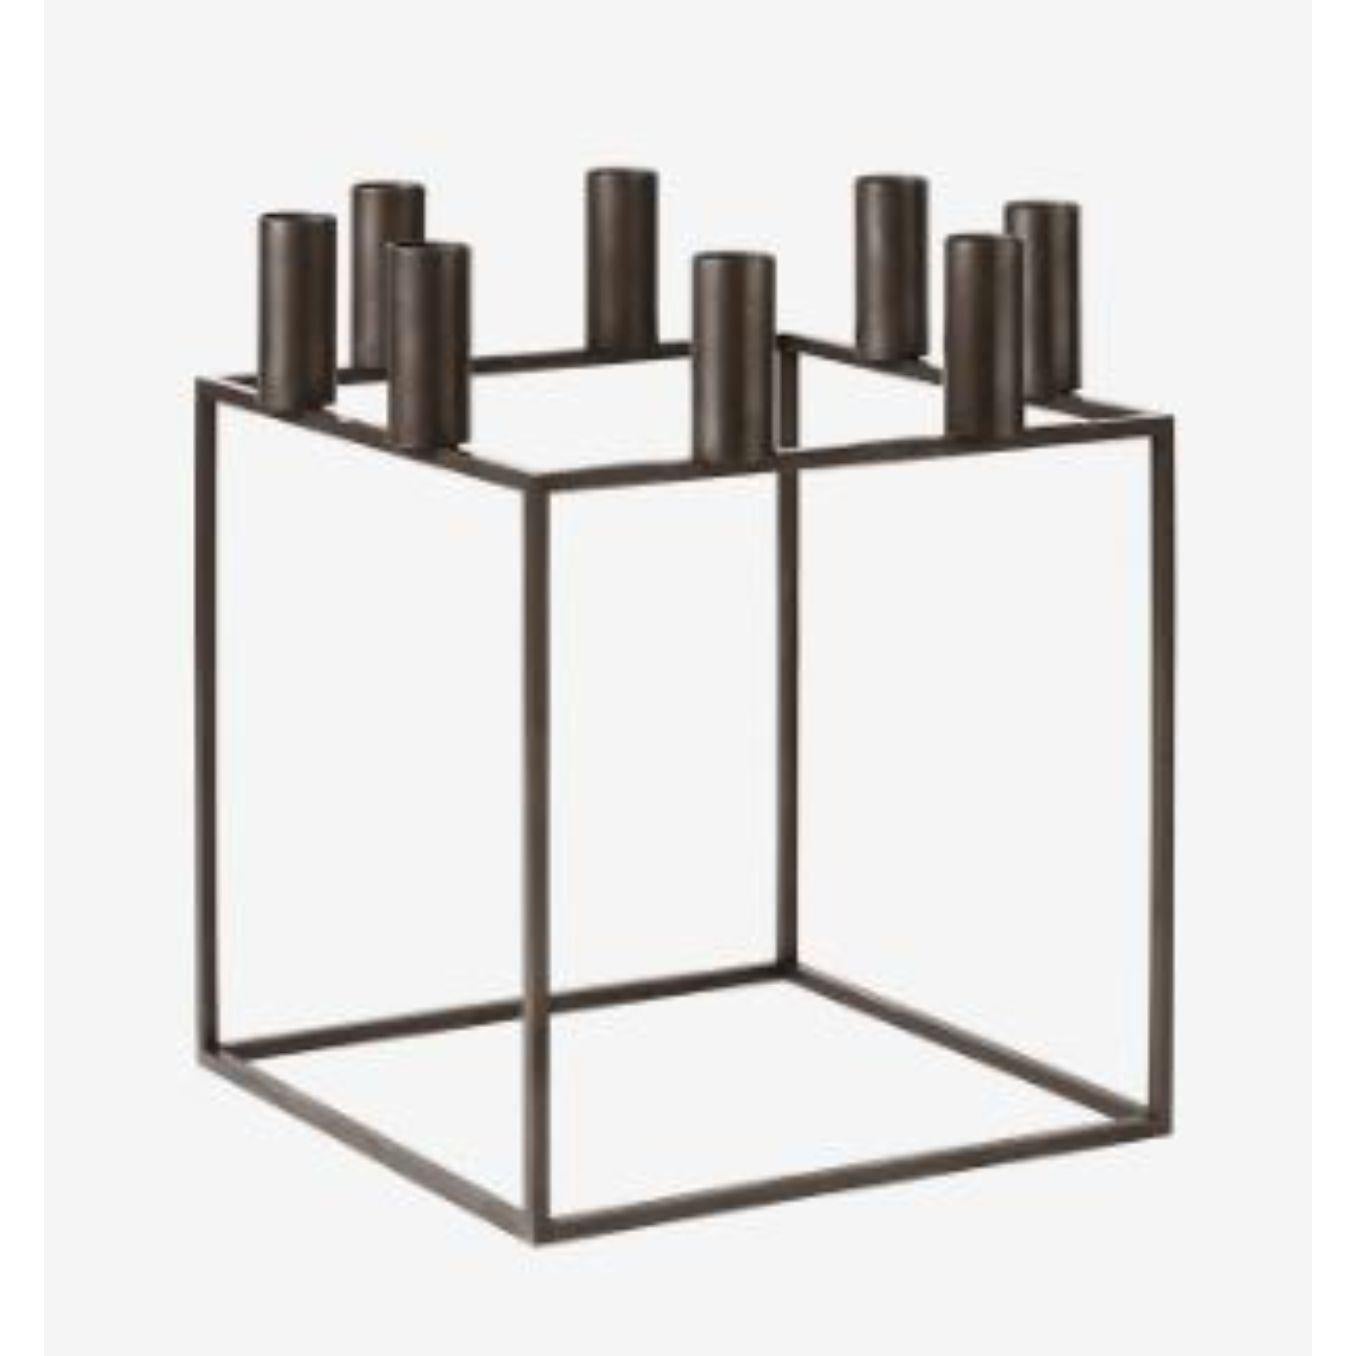 Burnished Copper Kubus 8 candle holder by Lassen
Dimensions: D 23 x W 23 x H 29 cm 
Materials: Metal 
Also available in different dimensions. 
Weight: 1.50 Kg

With a sharp sense of contemporary Functionalist style, Mogens Lassen designed the